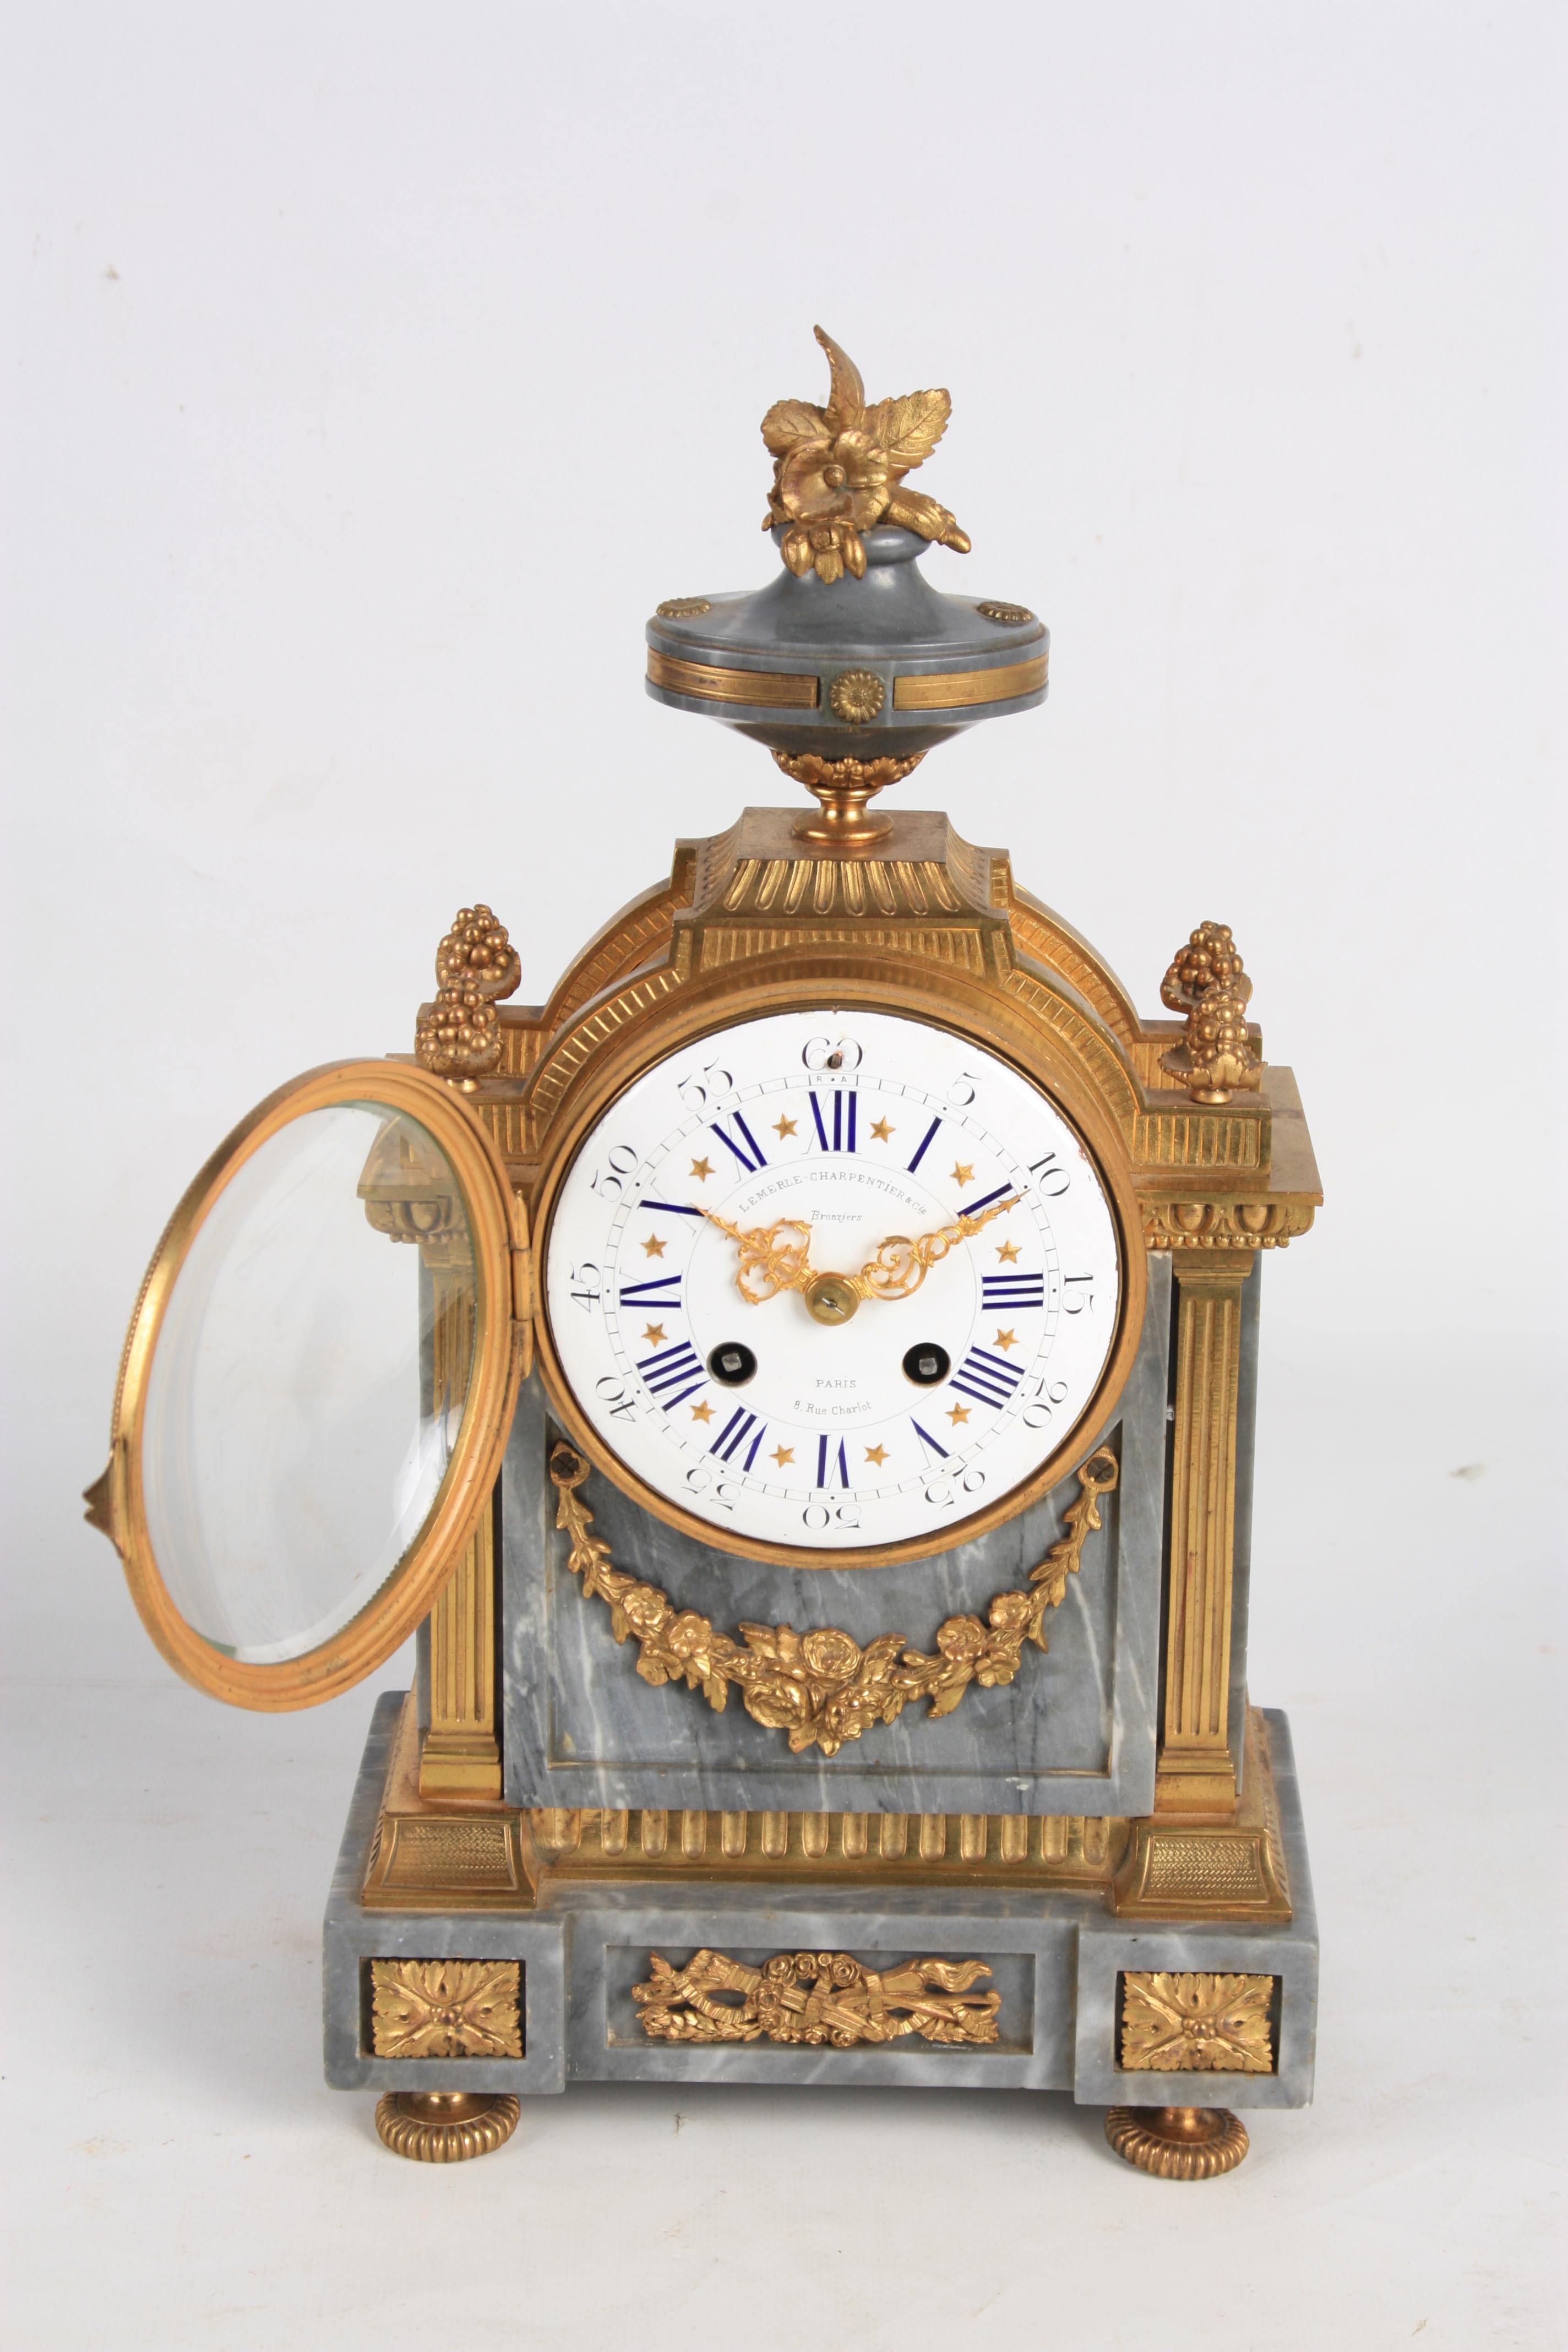 LEMERLE-CHARPENTIER & CIE, PARIS A MID 19TH CENTURY FRENCH MARBLE AND ORMOLU CLOCK GARNITURE the - Image 5 of 14